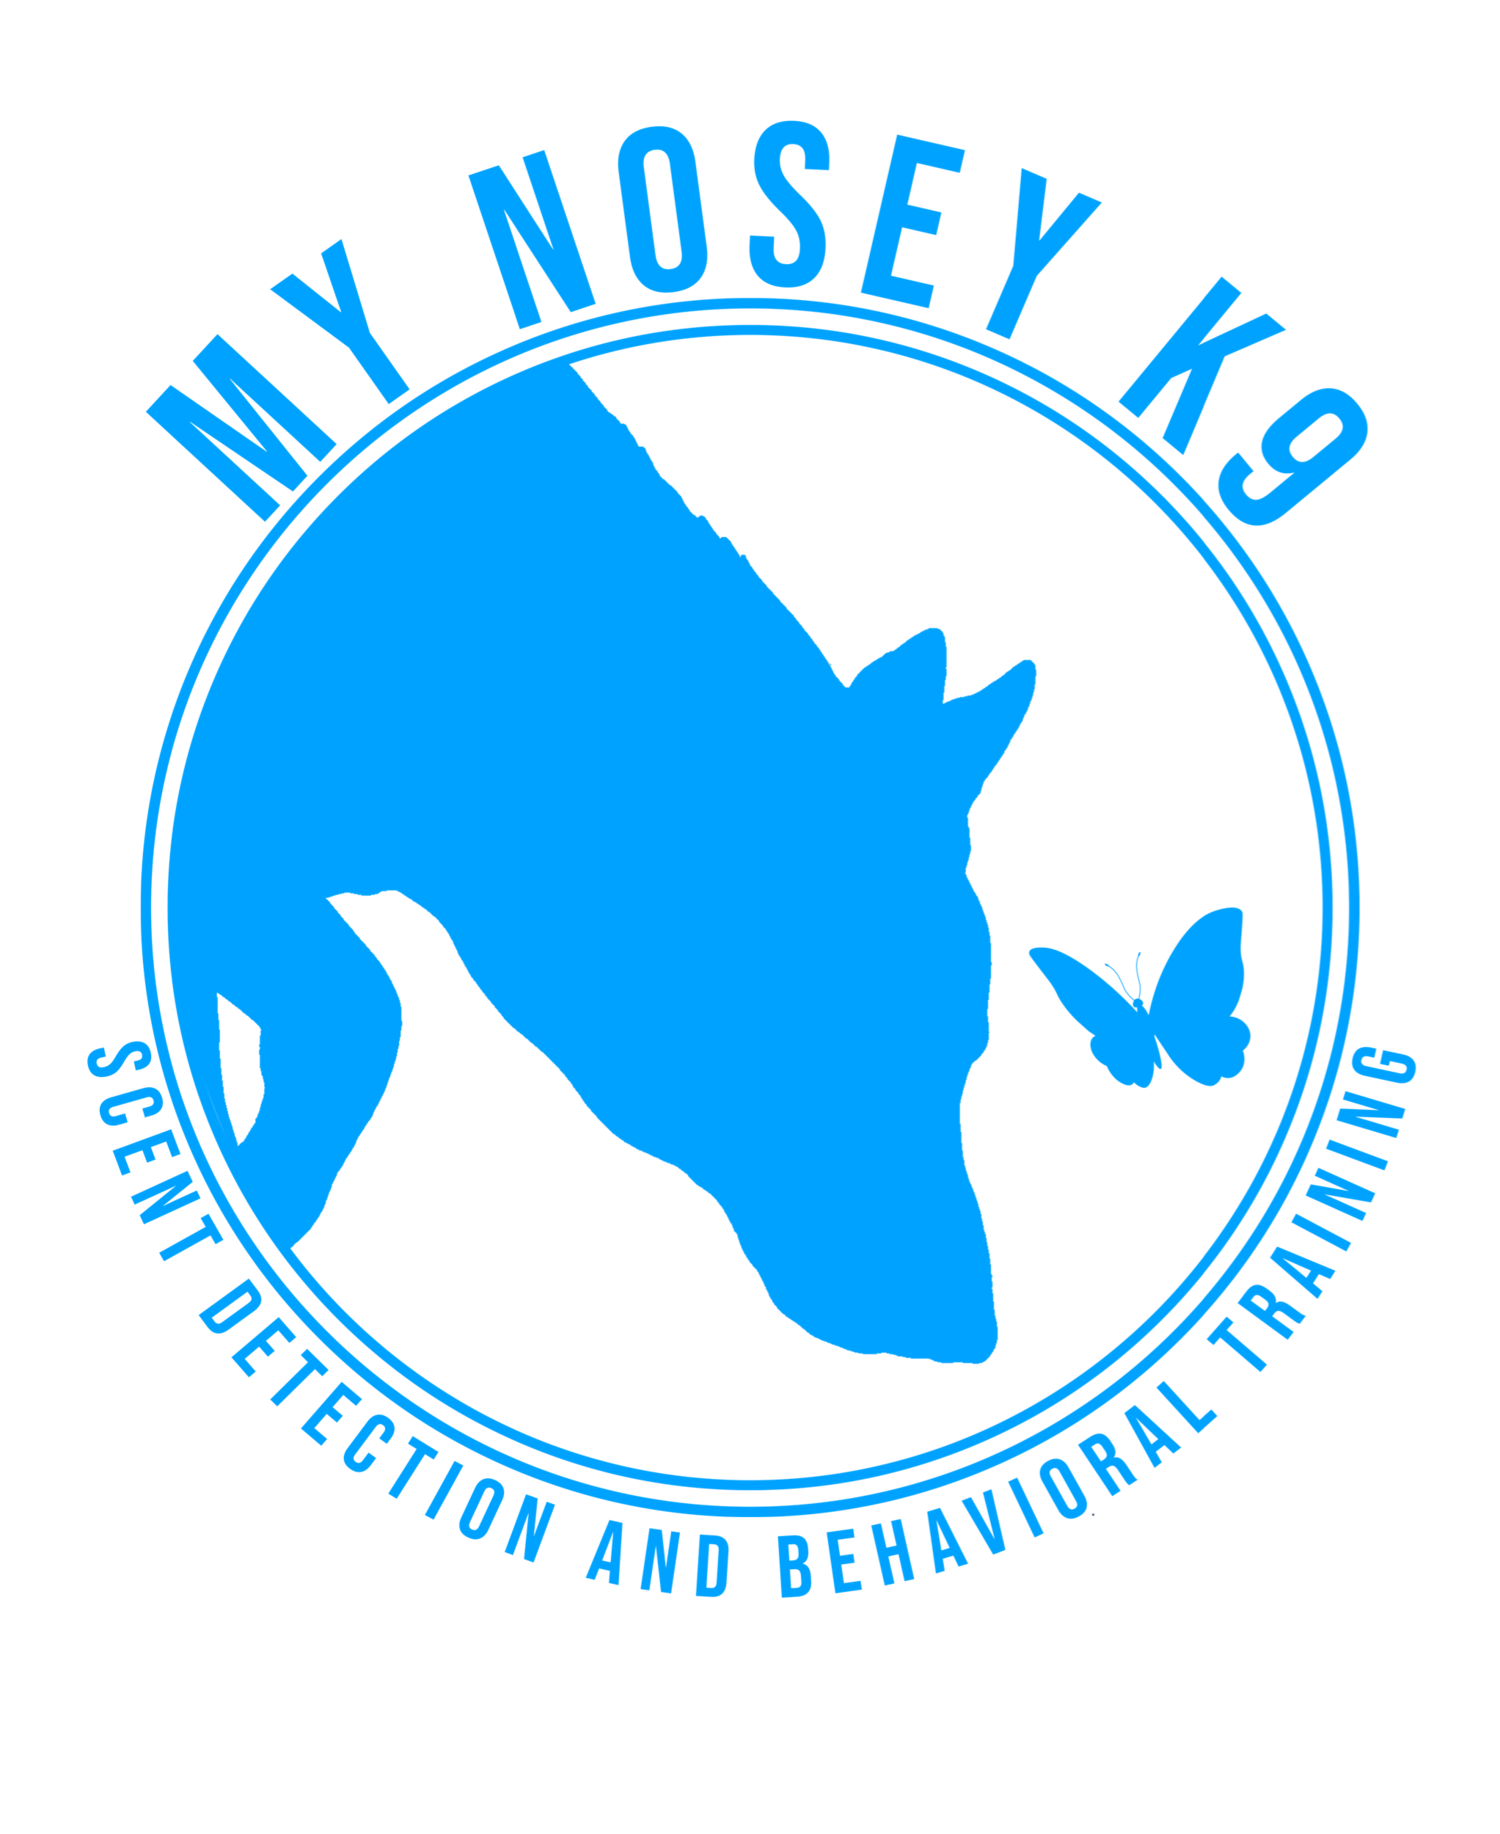 My Nosey K9: Scent Detection and Behavior Training